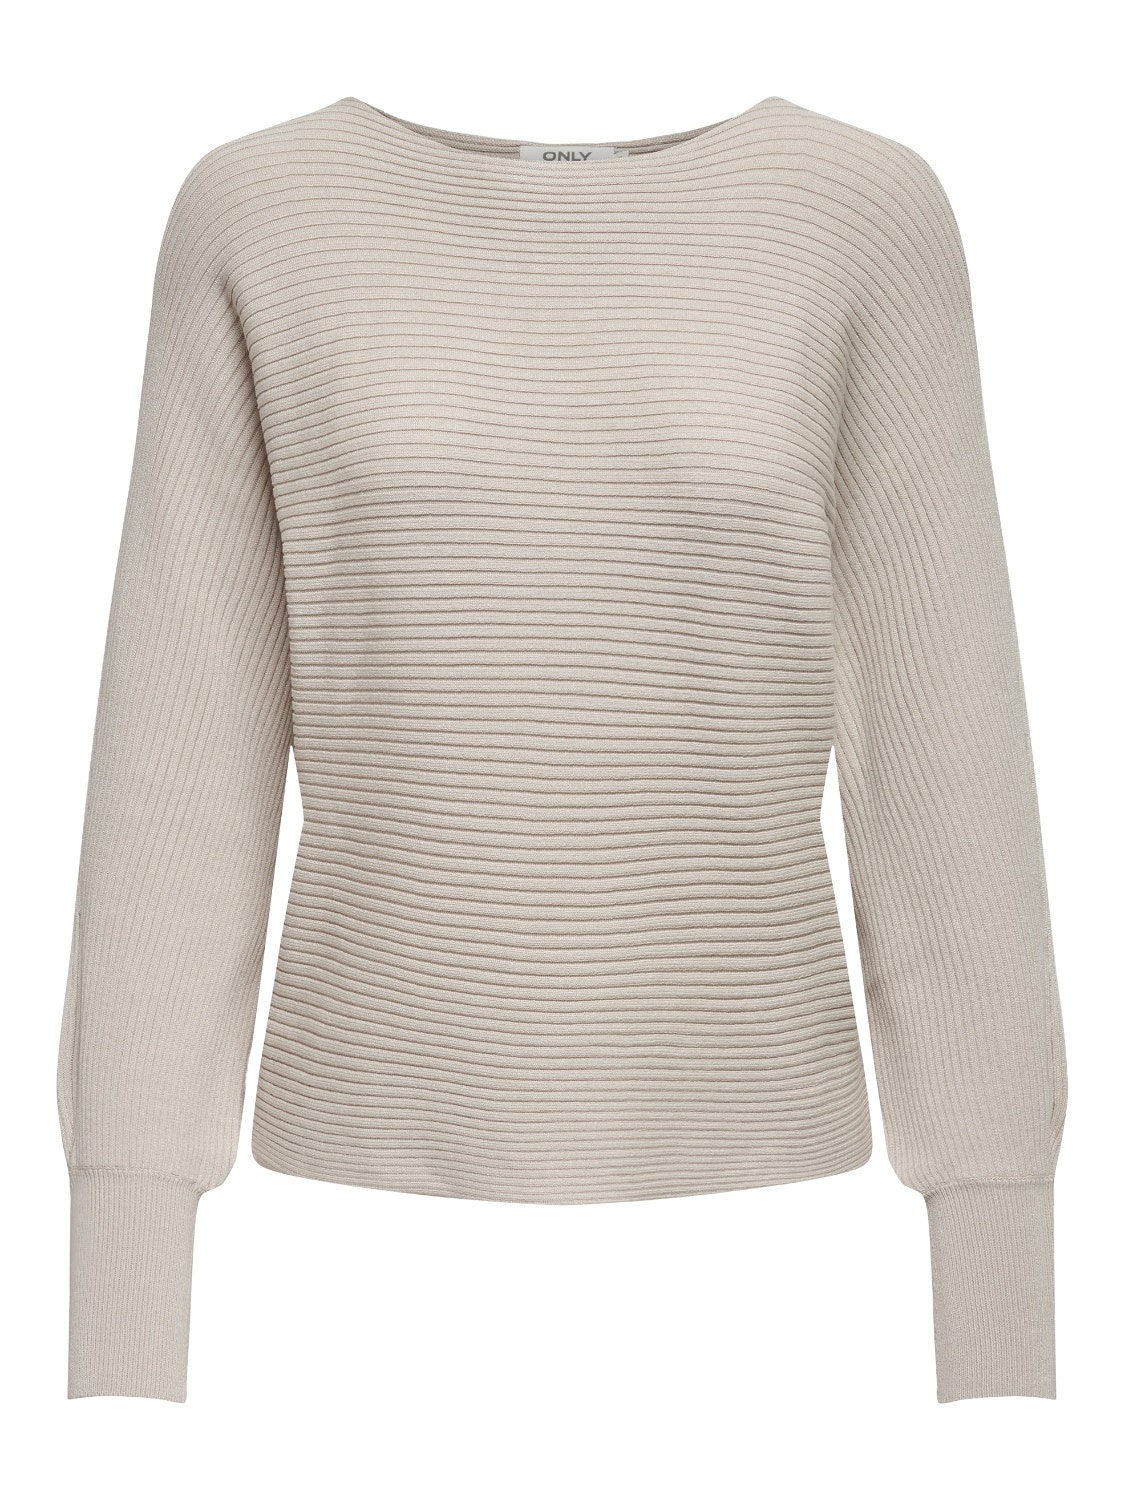 ONLY Boat neck High cuffs Pullover -Pumice Stone - 15226298